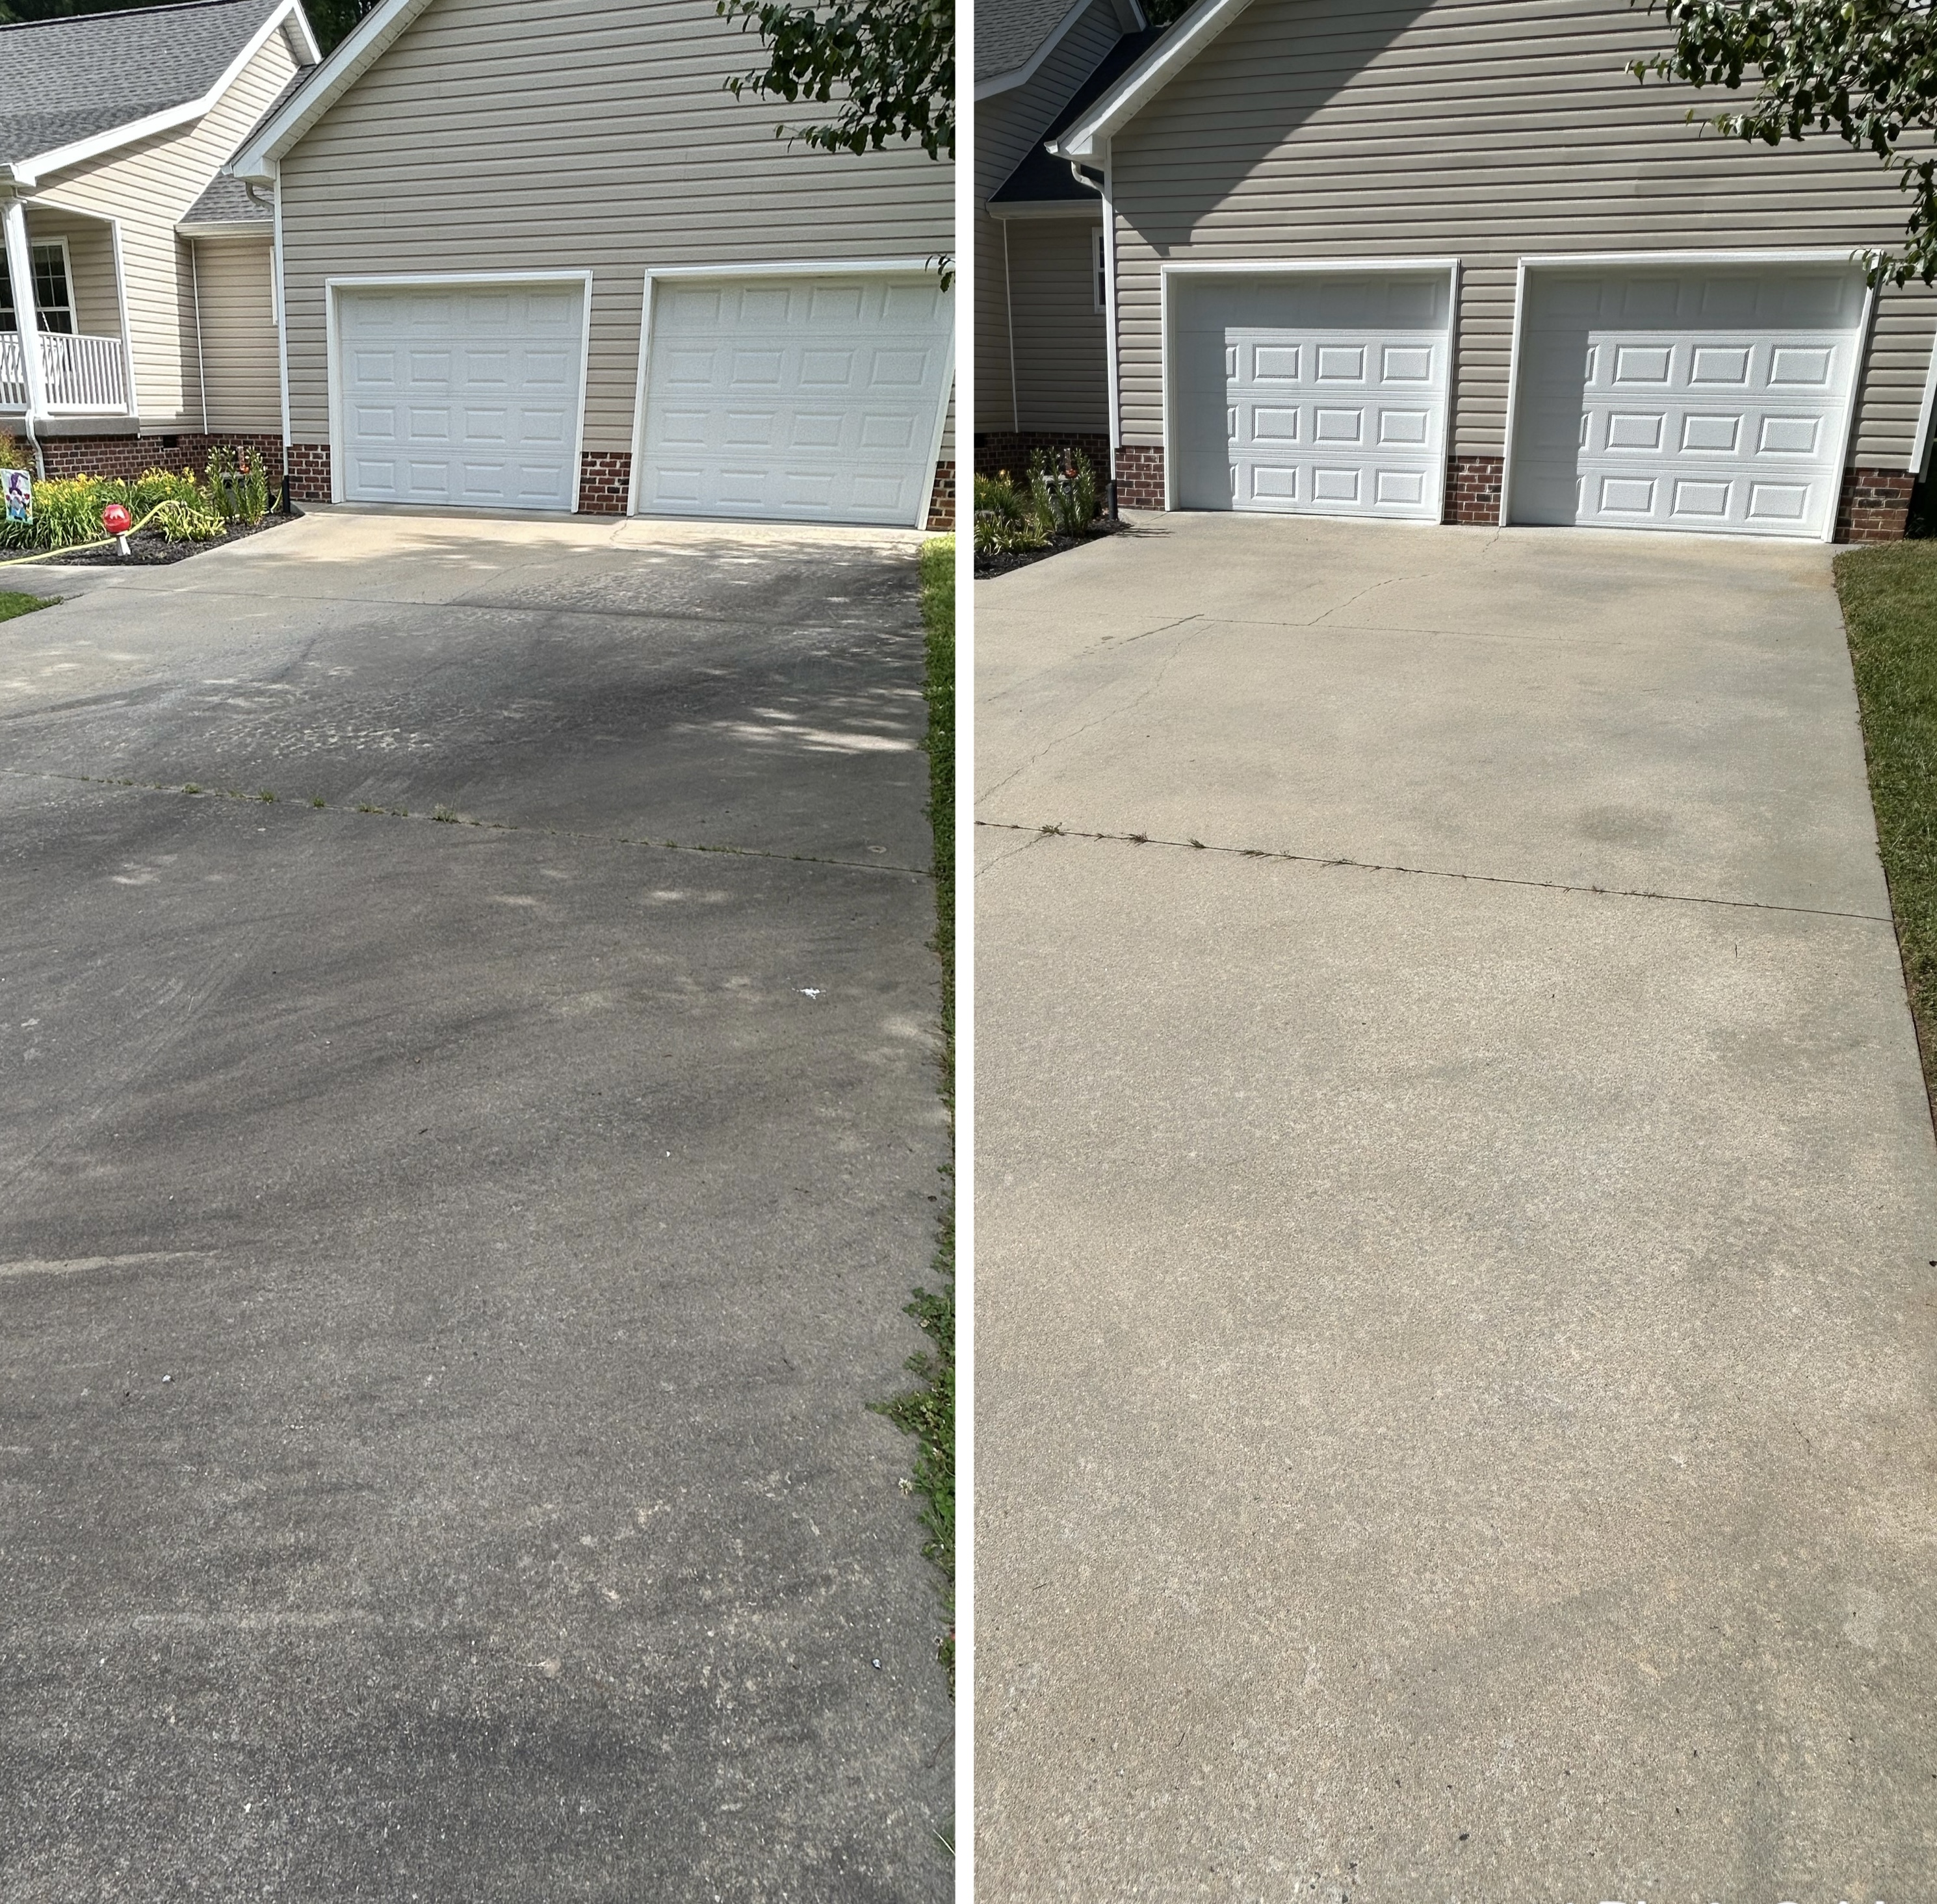 HOUSE WASHING, CONCRETE CLEANING, TREX DECK CLEANING IN LAWRENCEVILLE, VA